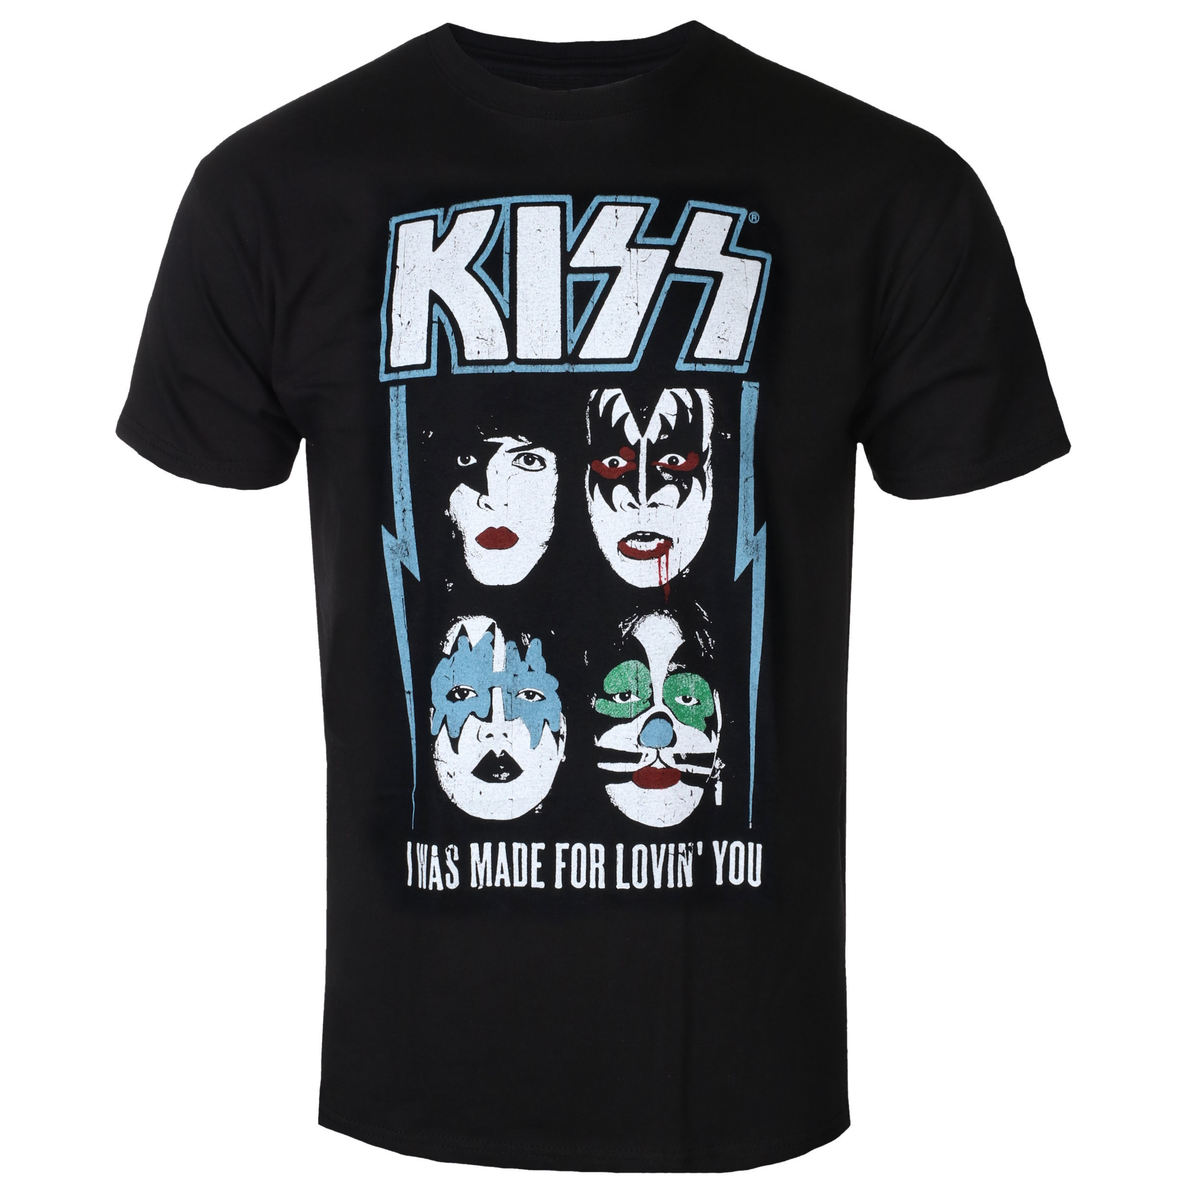 KISS - Made For Lovin' You (XL)